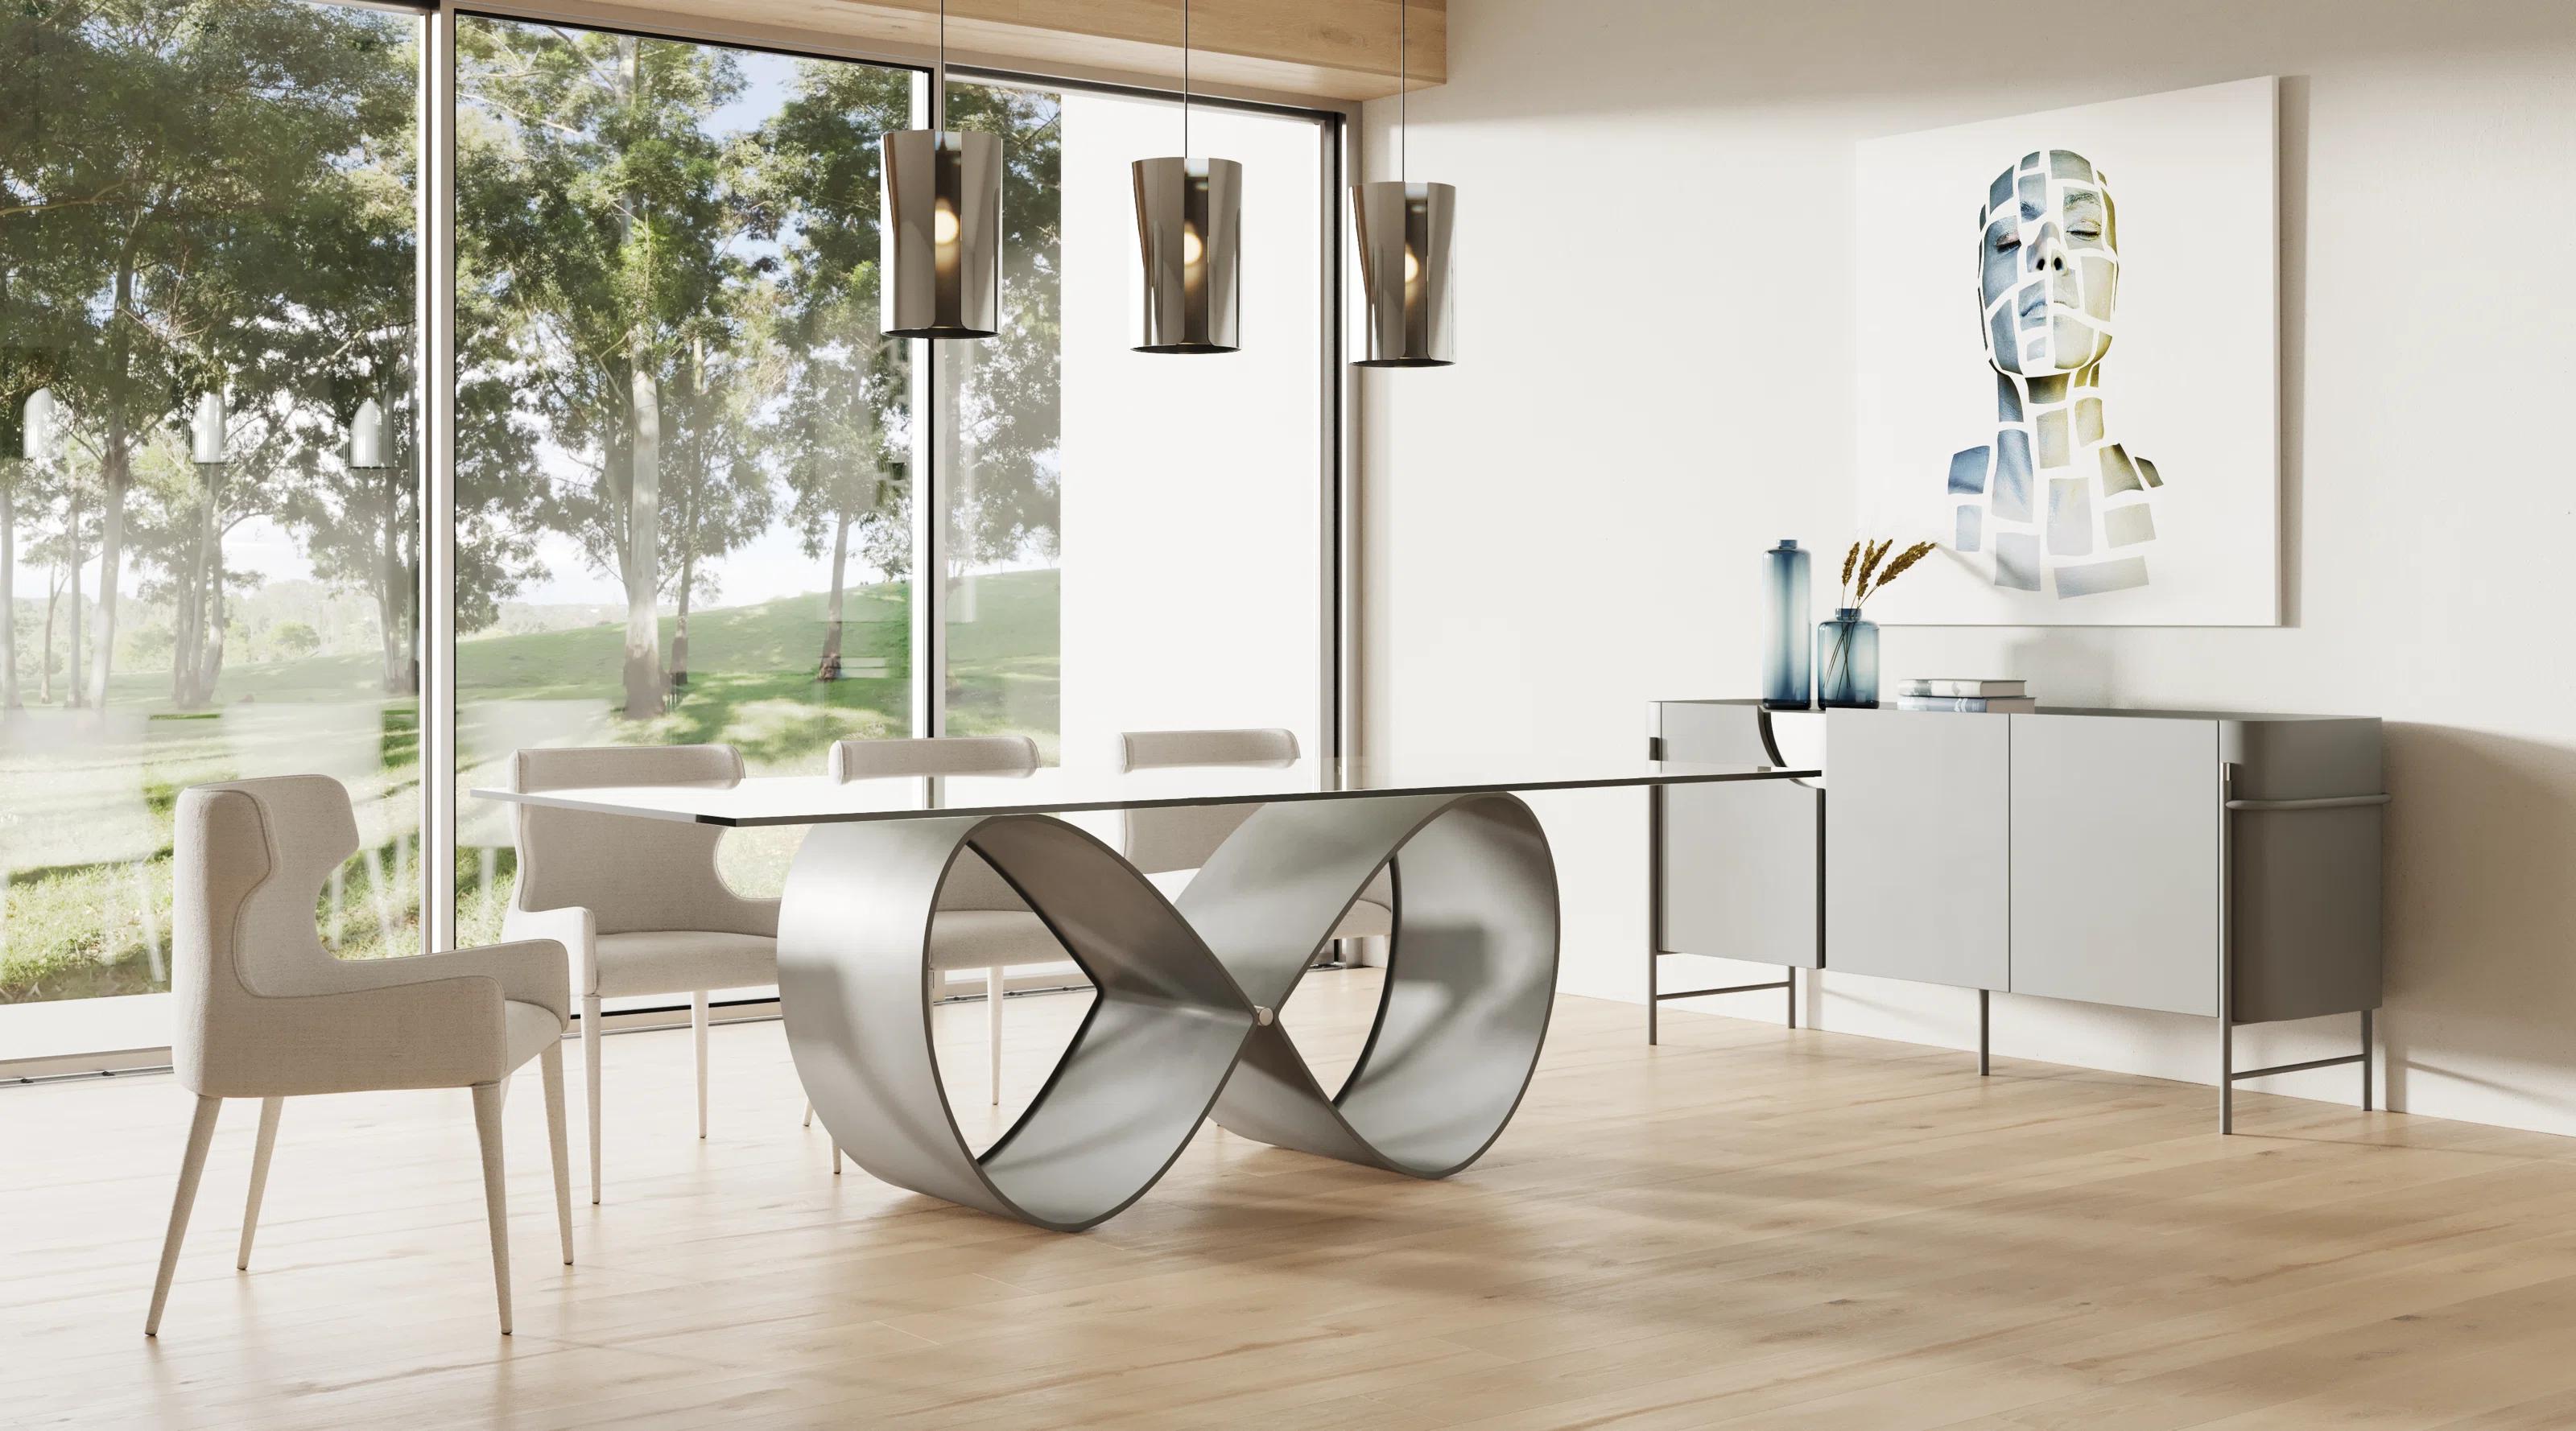 Contemporary, Modern Dining Room Set Hadley VGGM-DT-CASTA-DT-6pcs in Silver Fabric